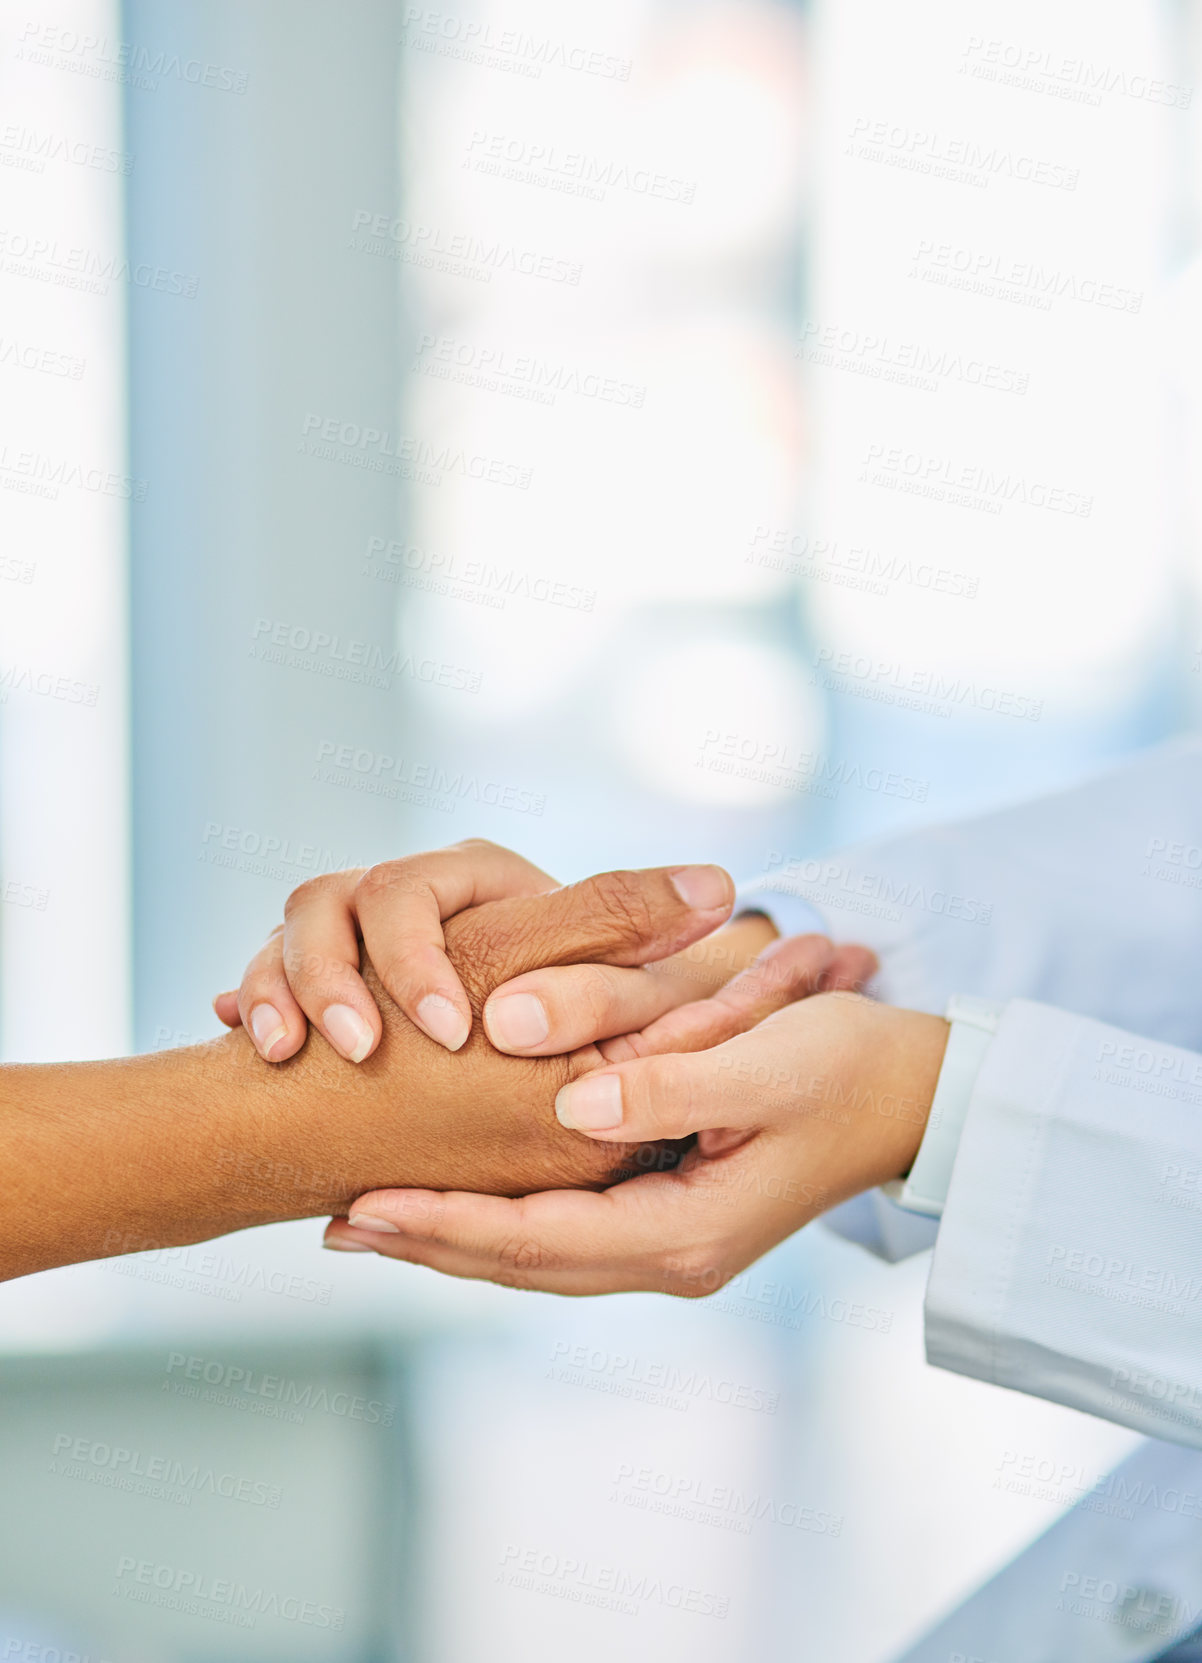 Buy stock photo Closeup shot of an unrecognizable doctor holding a patient's hand in comfort